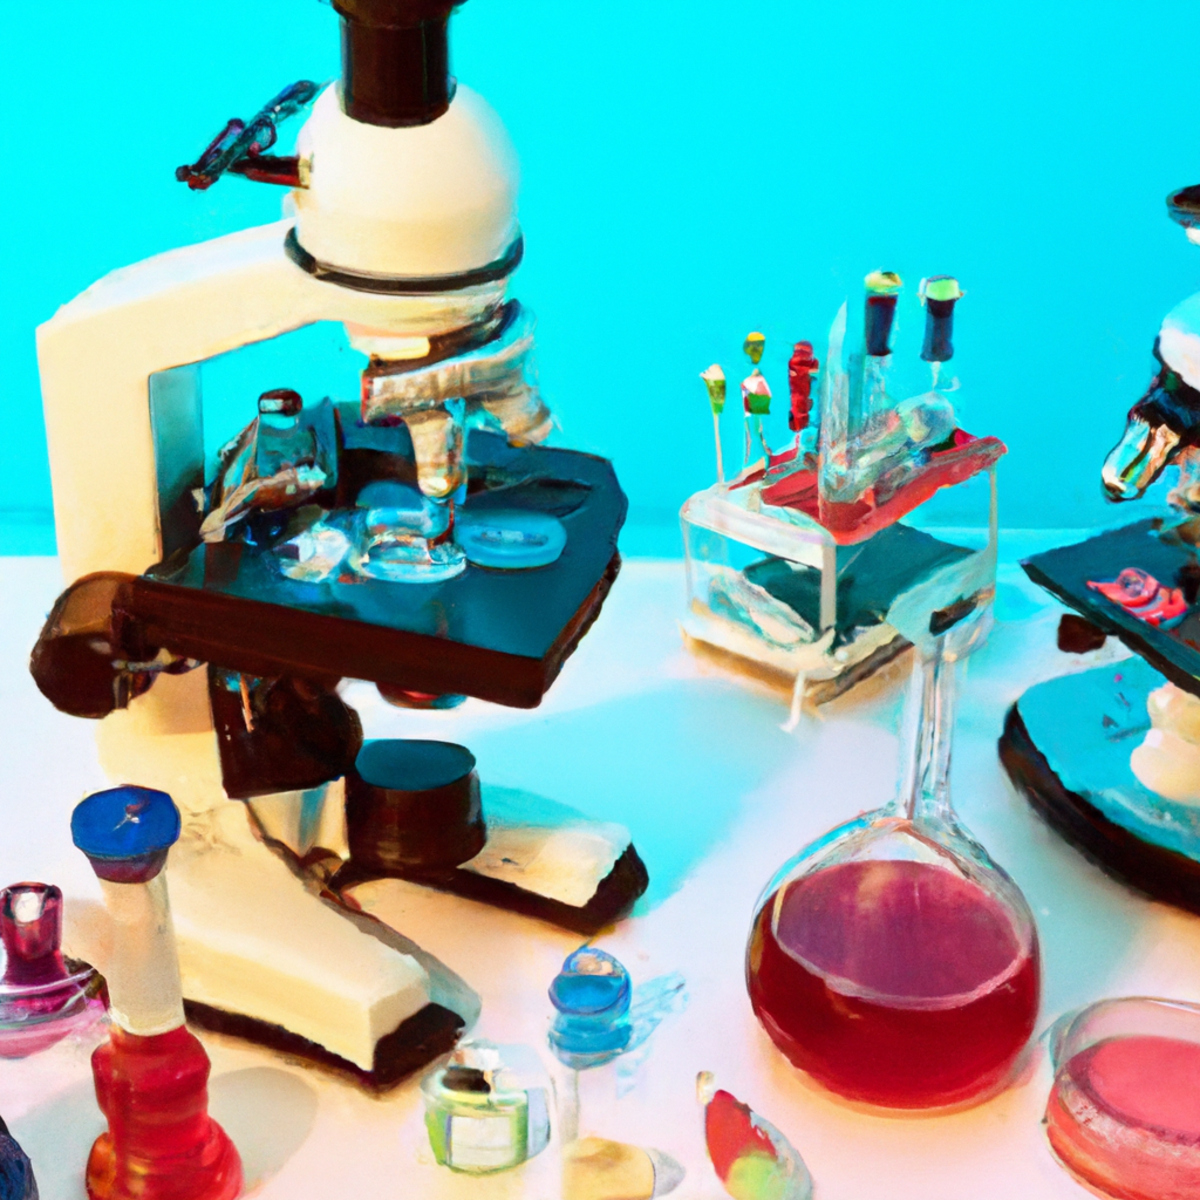 Lab equipment and research tools in a vibrant setting, emphasizing the scientific nature of the article on Pallister-Killian Syndrome.